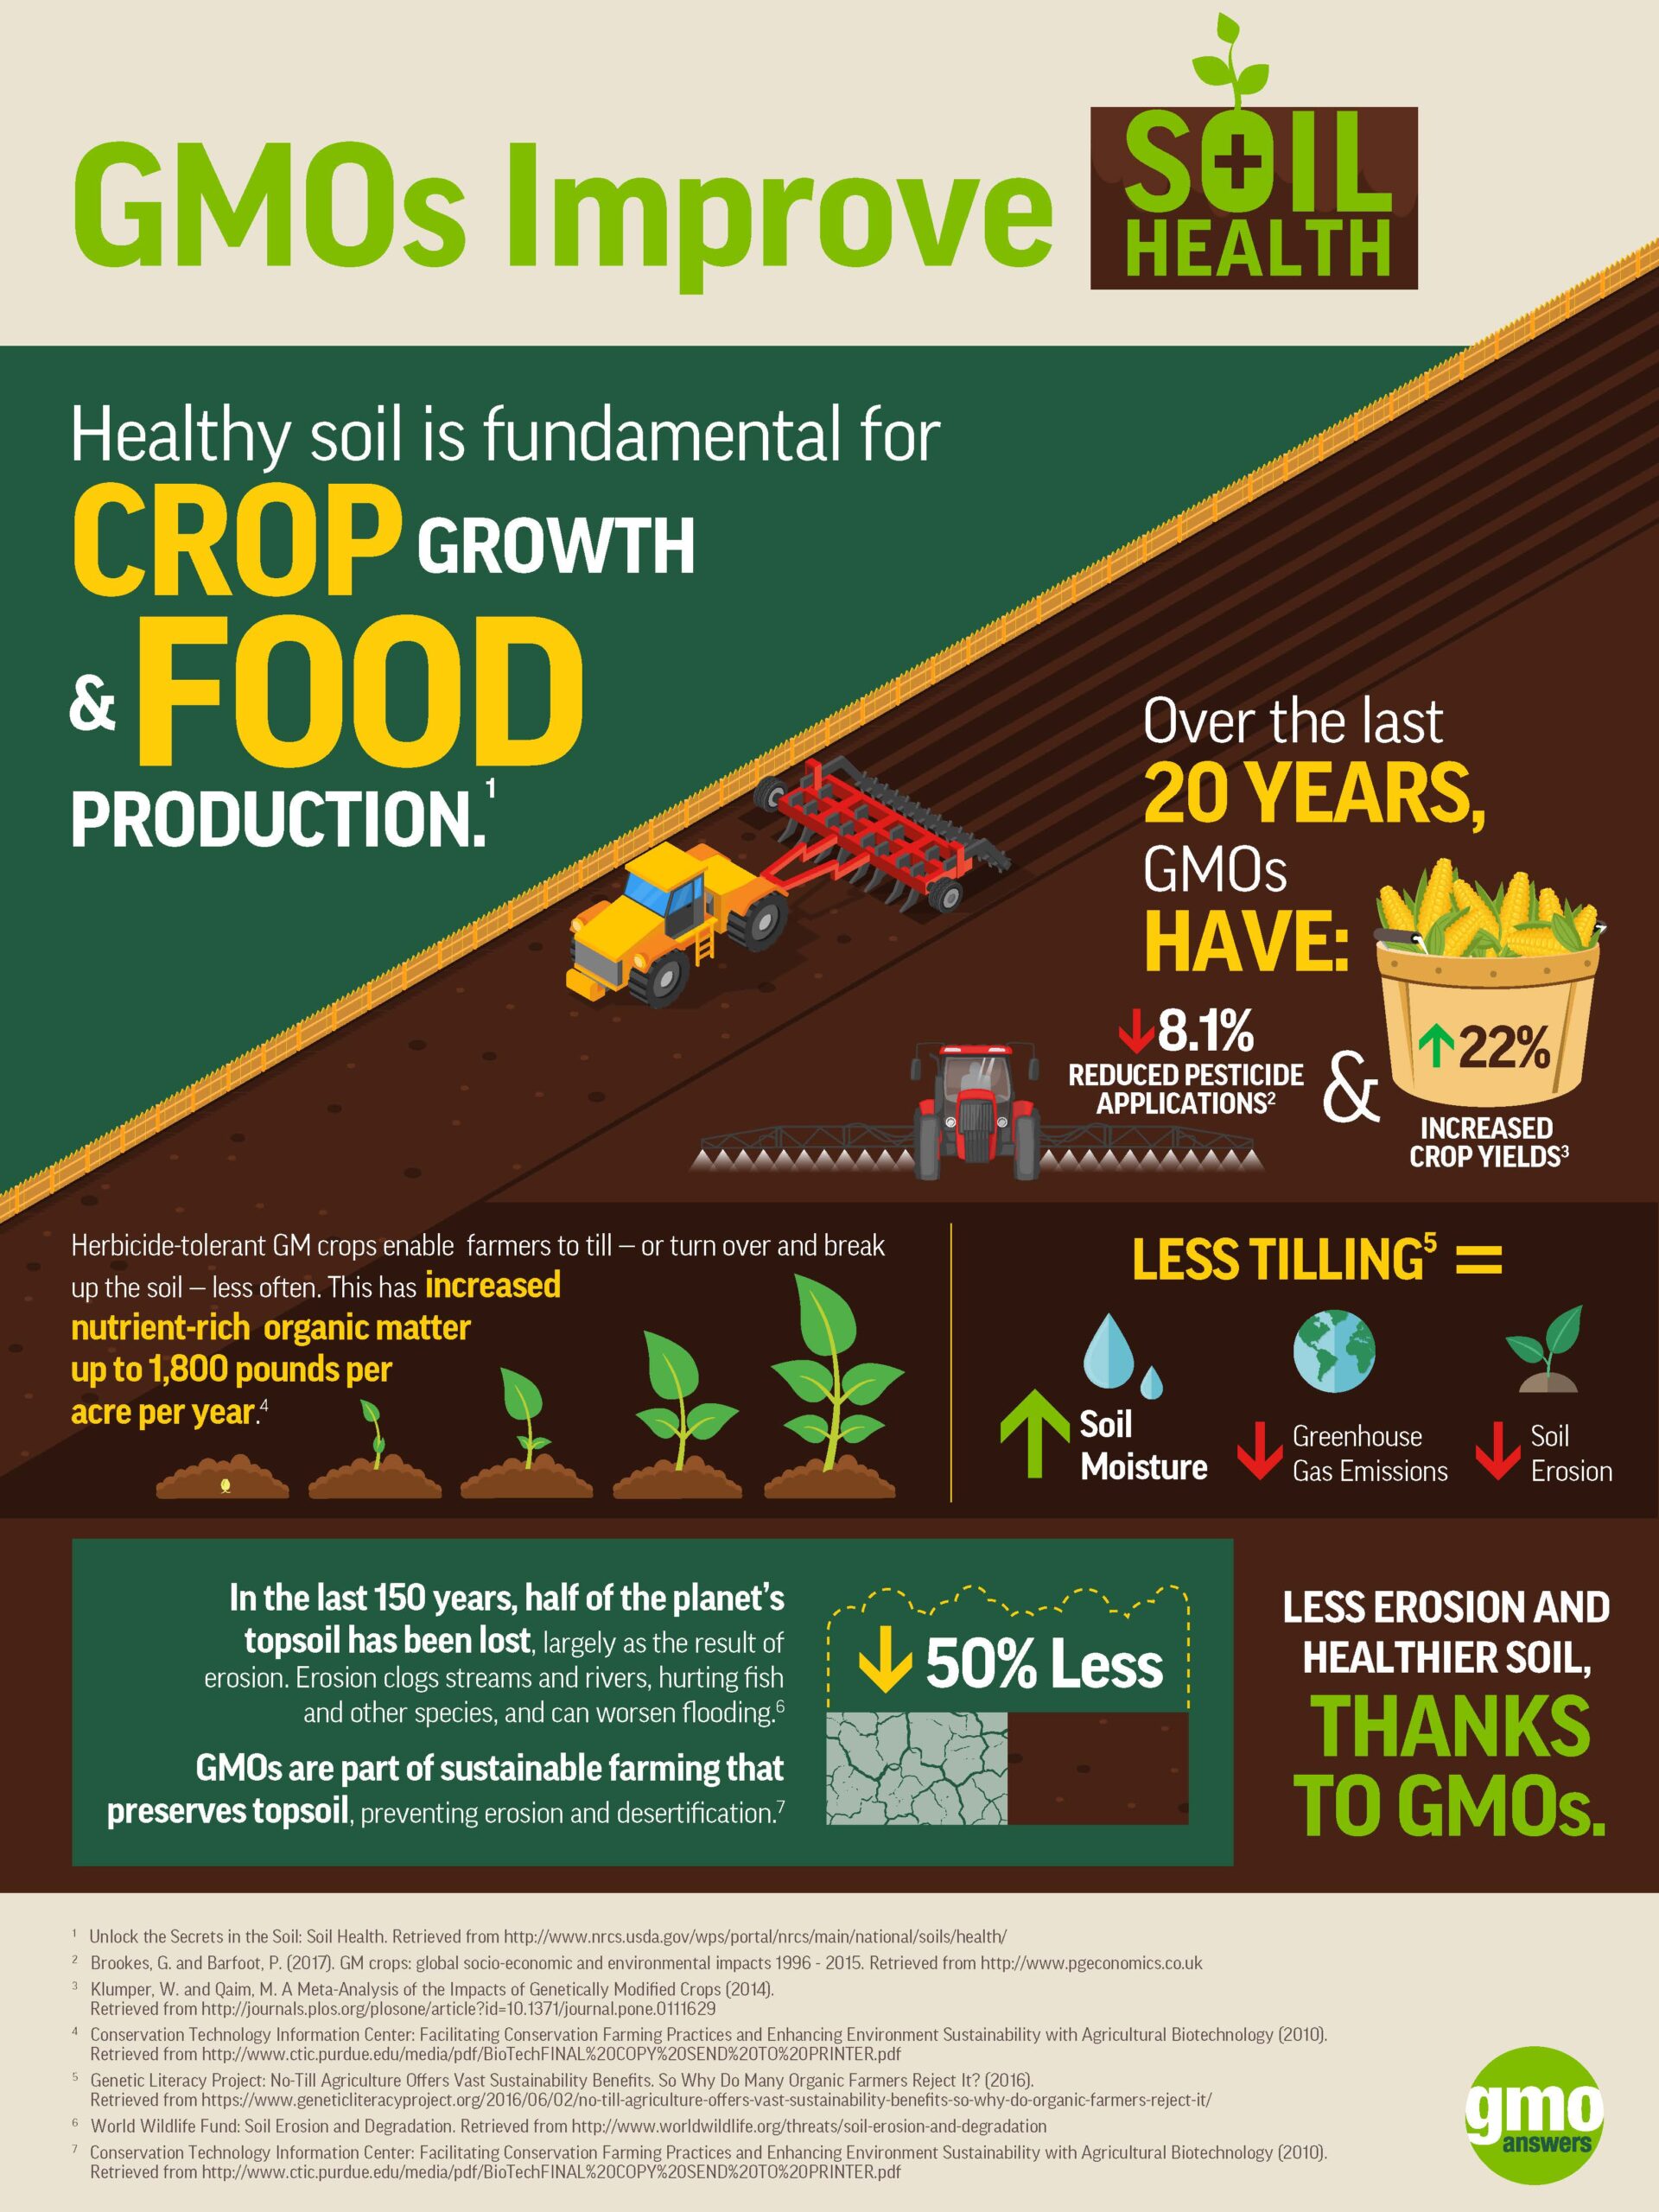 GMO? Genetically Modified Organism | Visual.ly